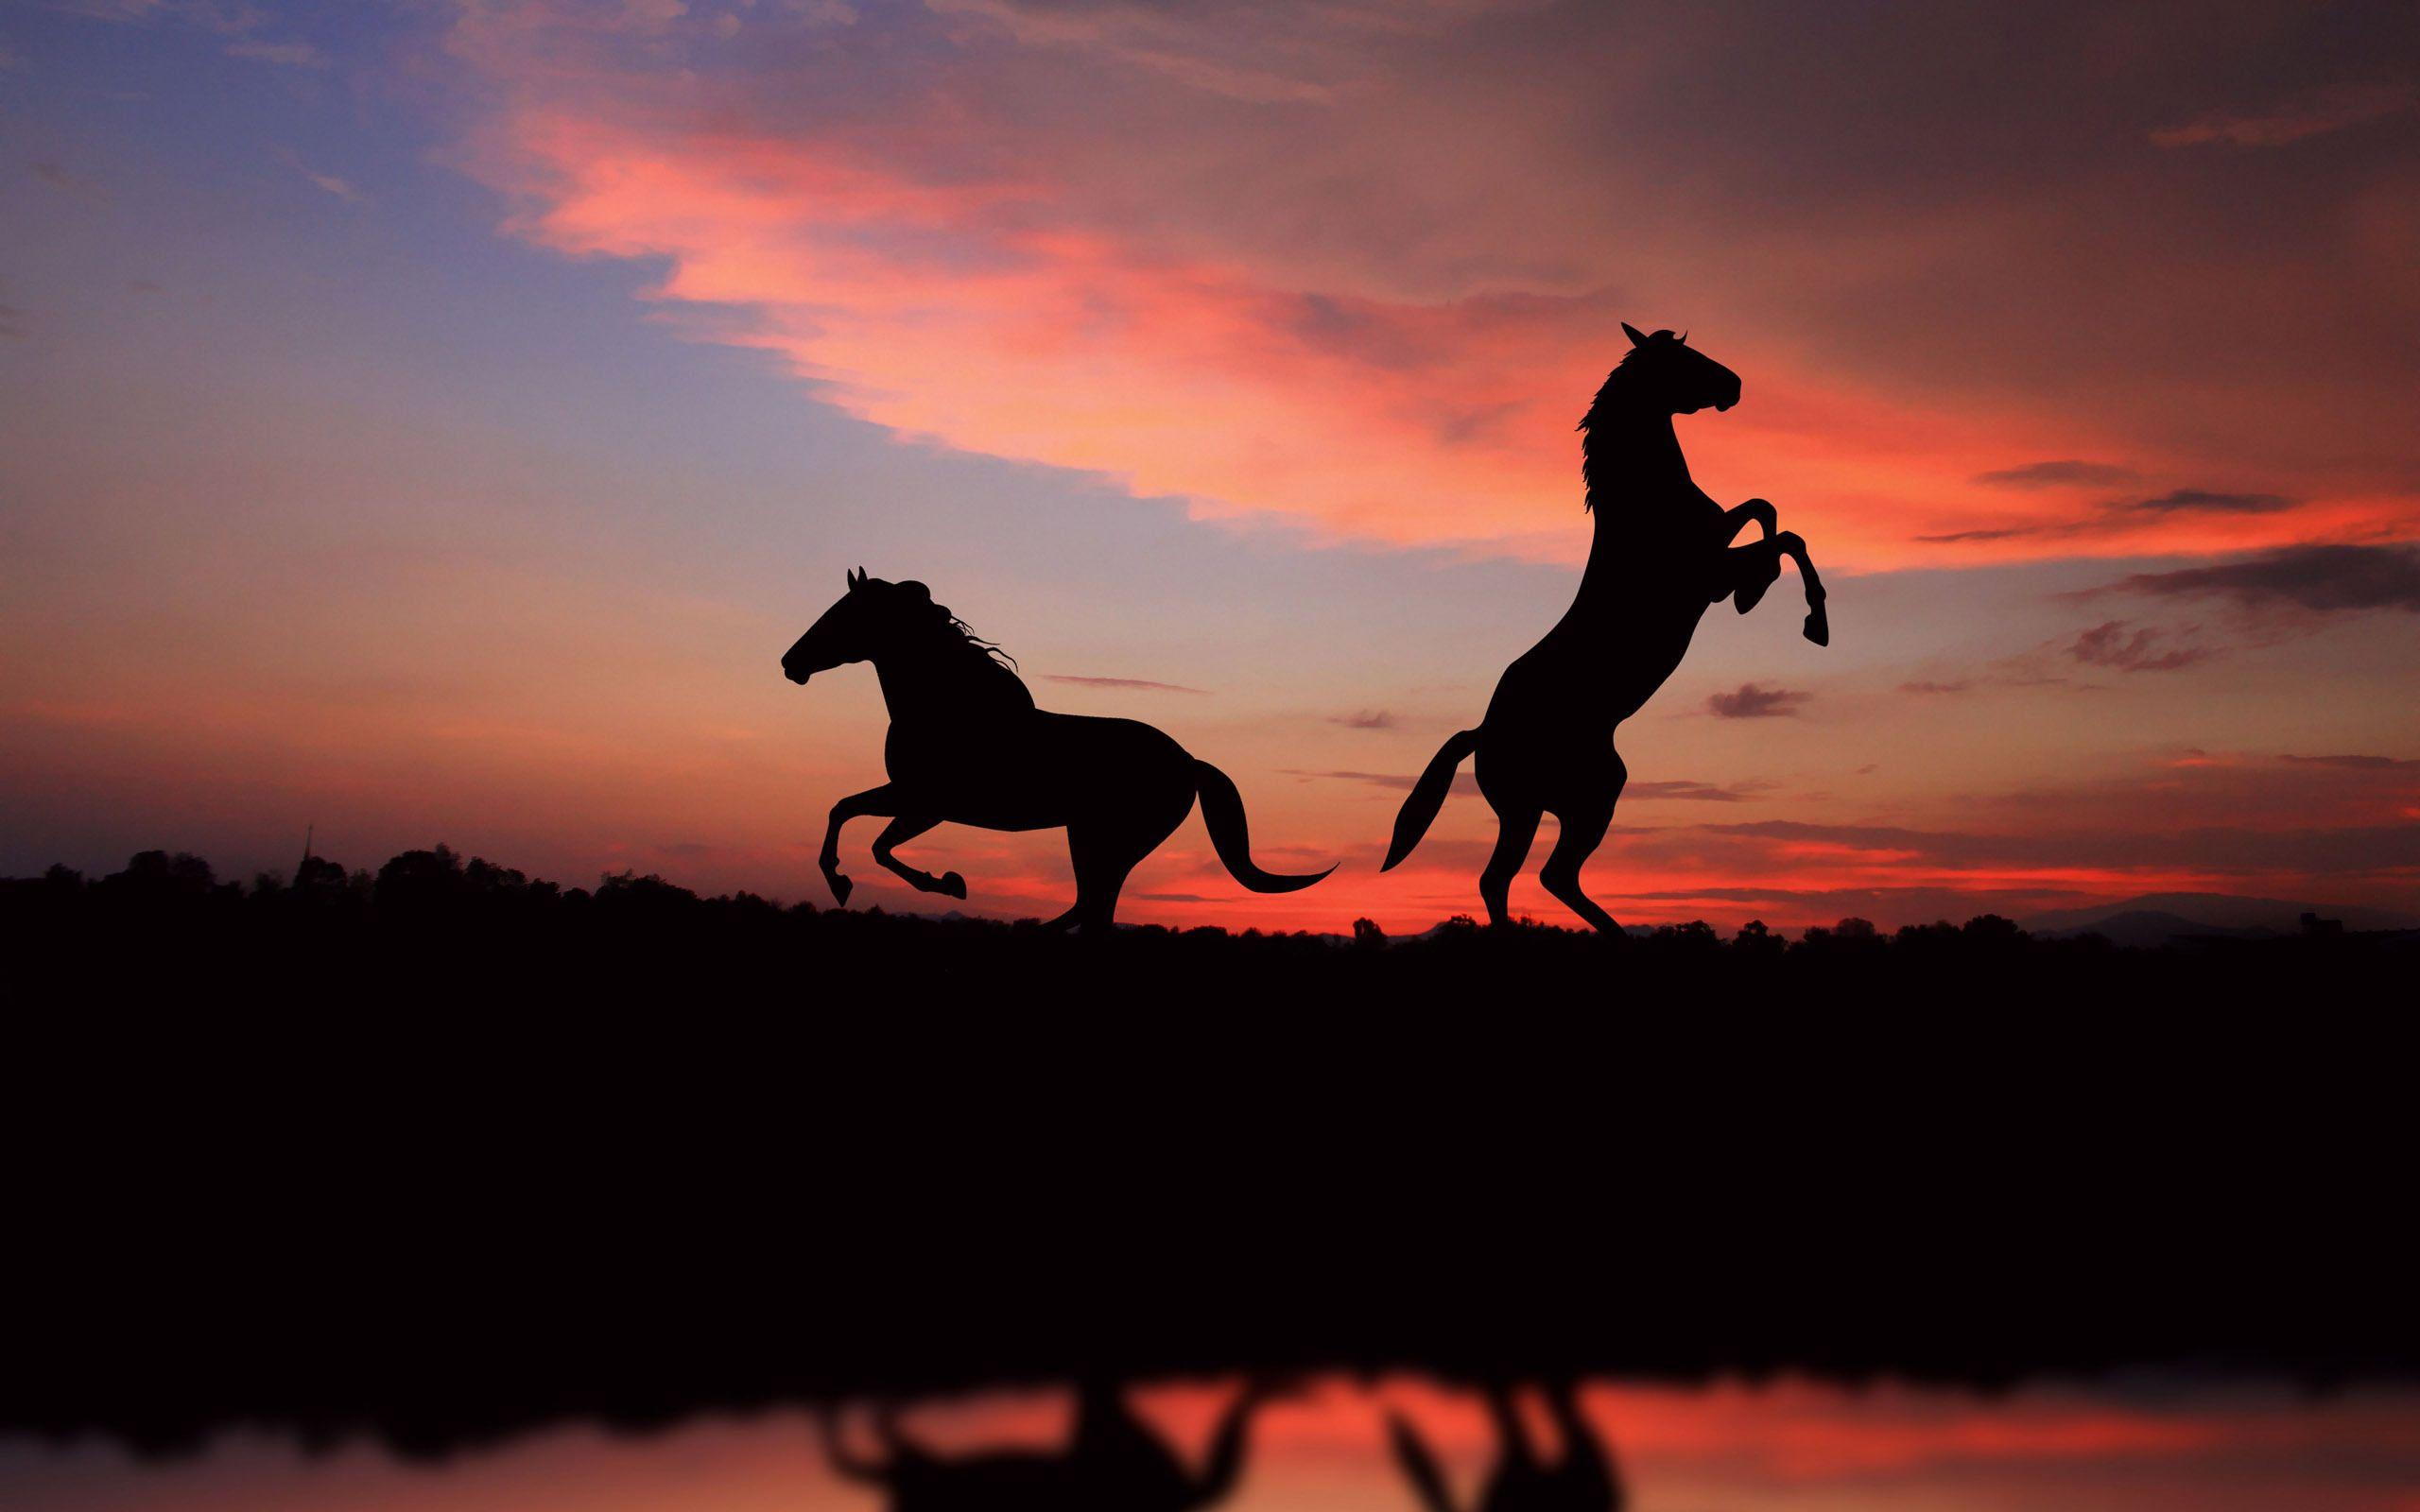 sunset silhouettes. Horse silhouettes in the sunset light